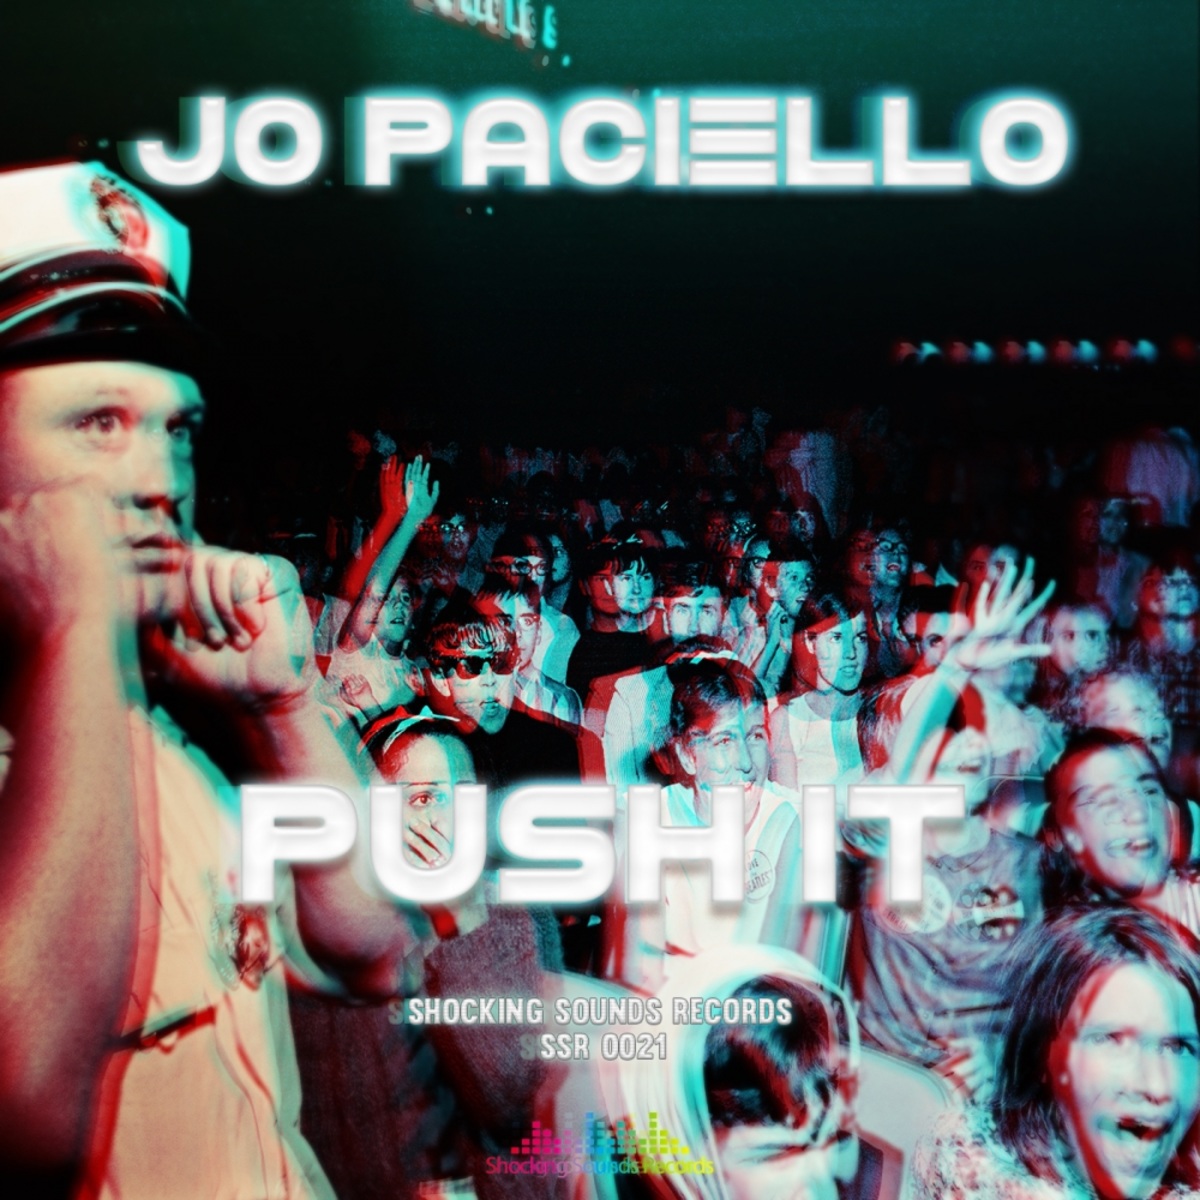 Jo Paciello - Push It (In My Mind) / Shocking Sounds Records